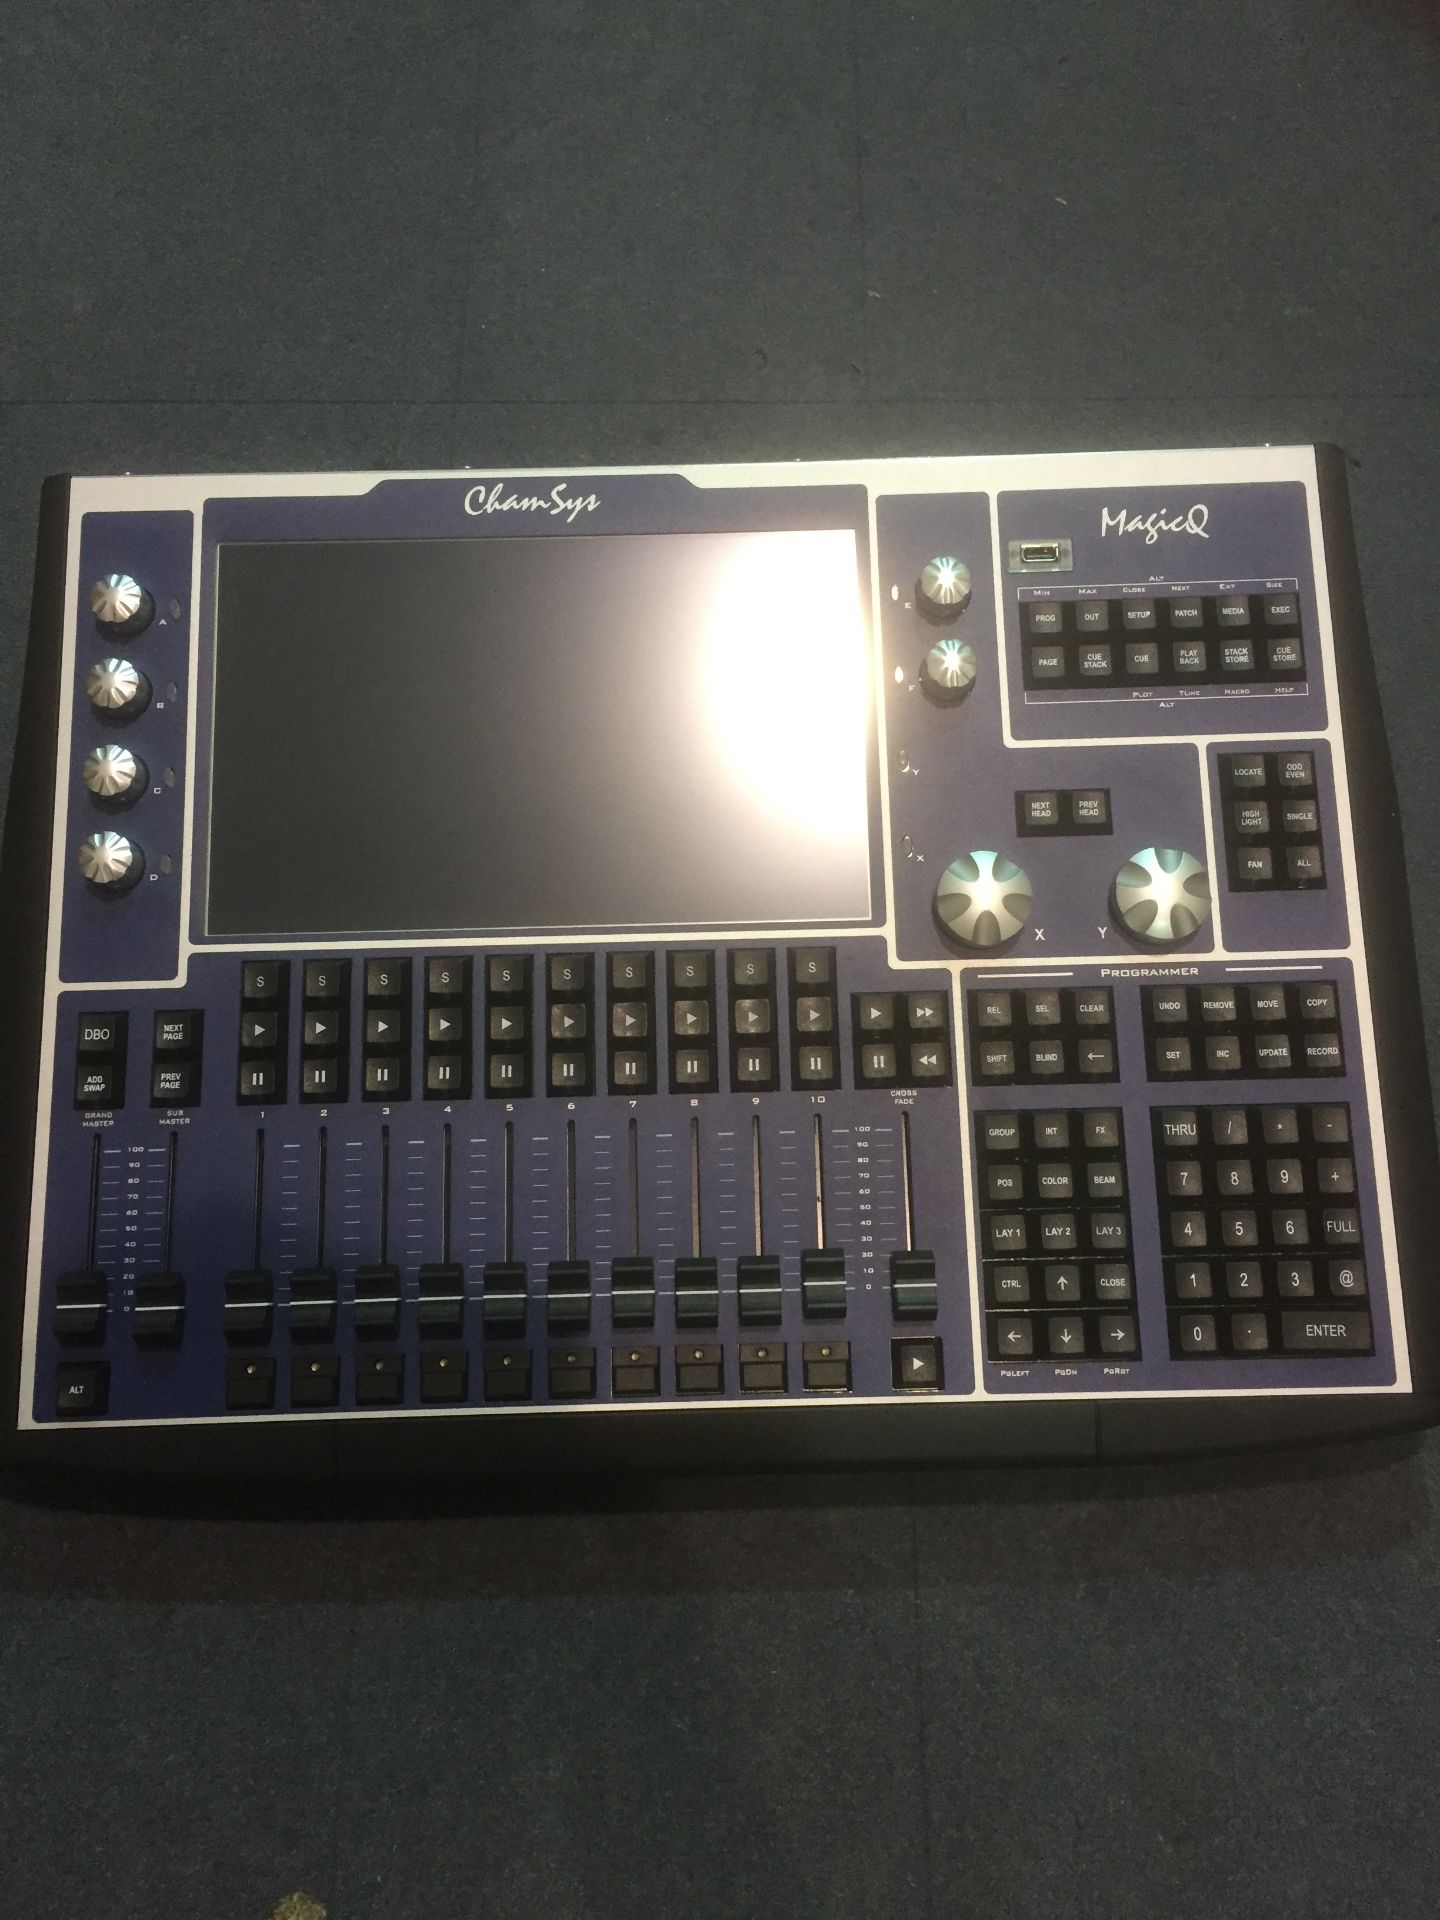 Chamsys MagicQ MQ80 compact lighting console, S/N CH5 000915191446, with power lead and flight case